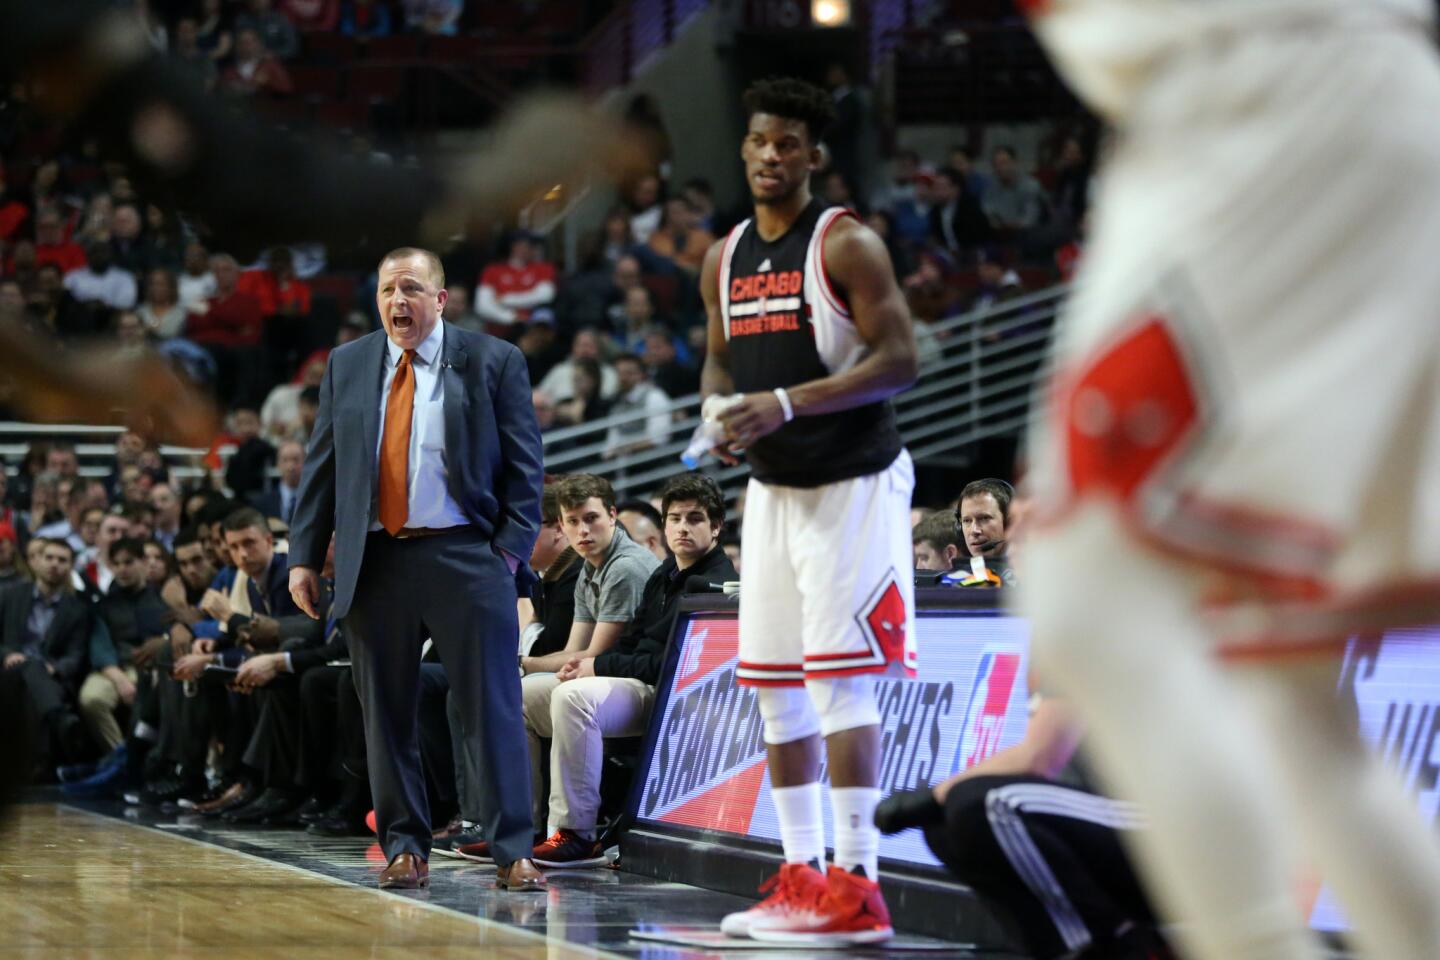 Chicago Bulls head coach Tom Thibodeau stands on the court in the